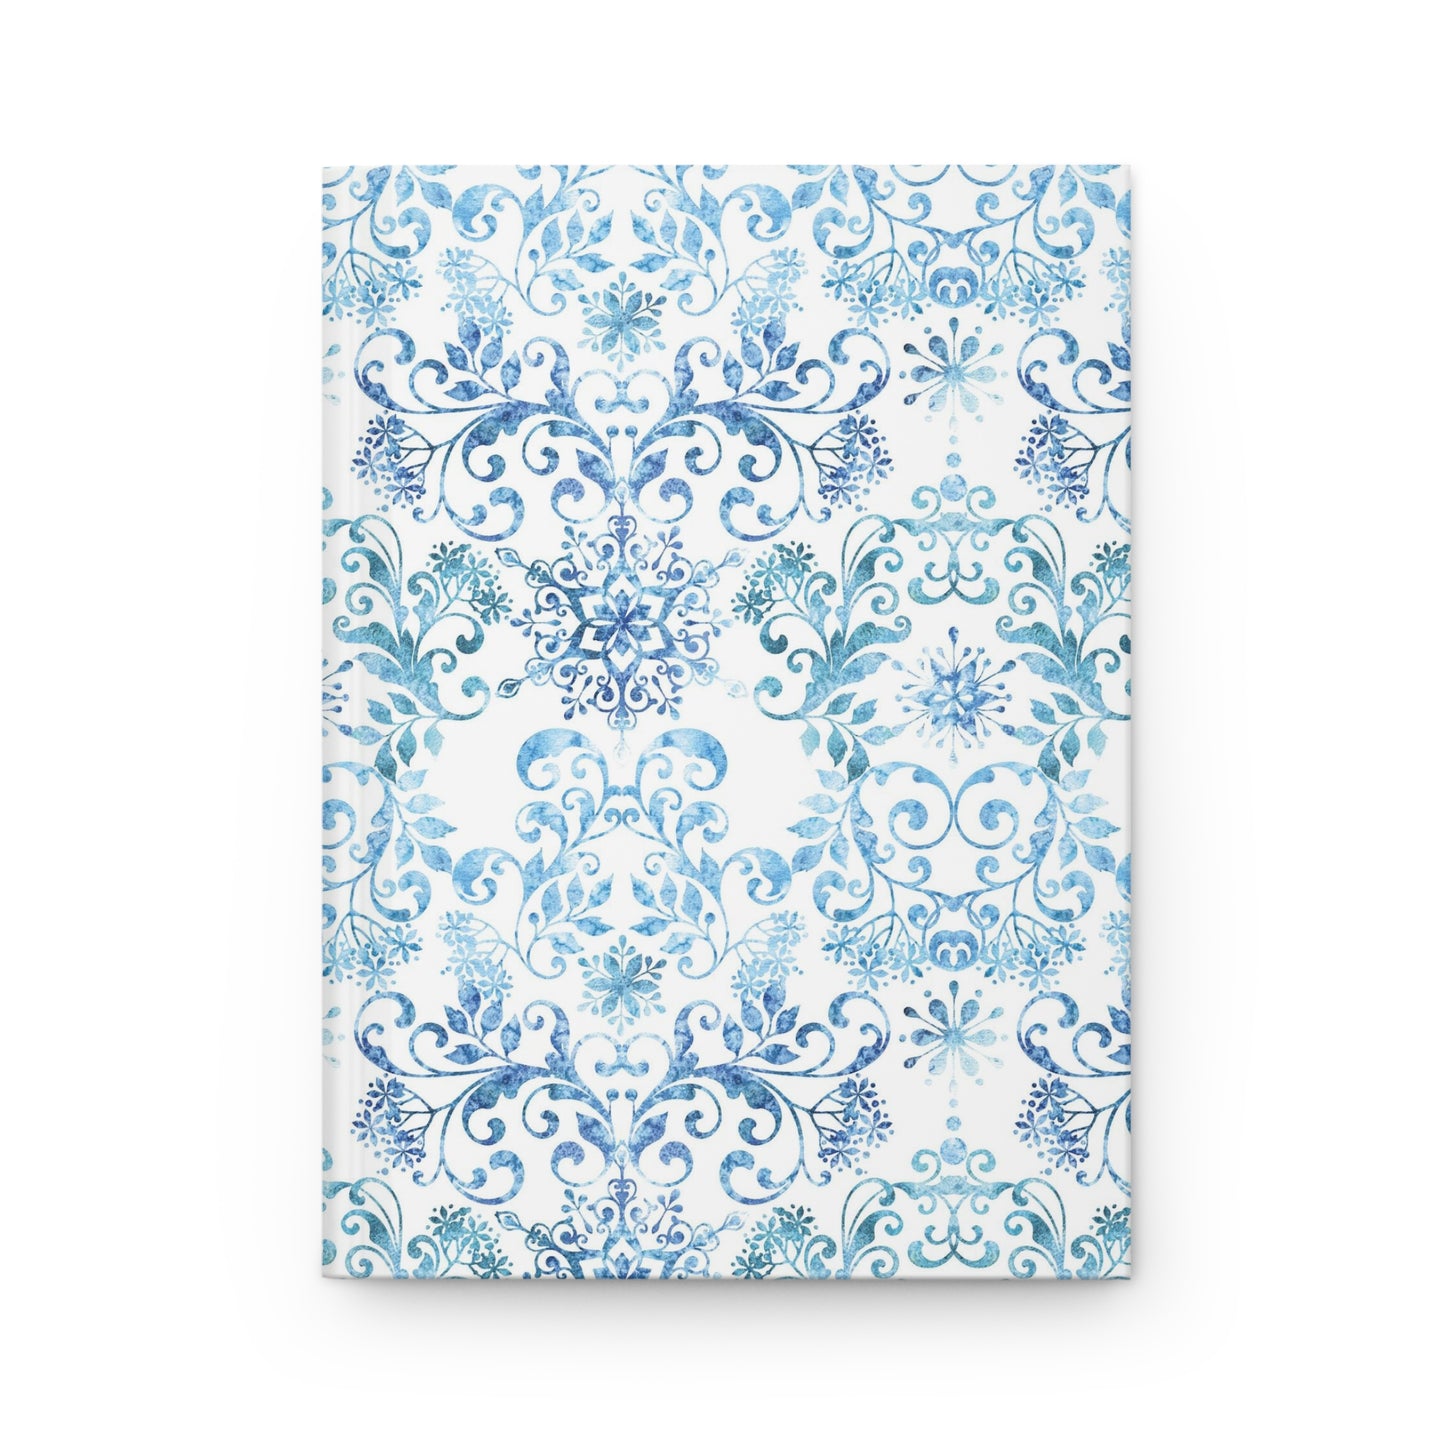 Beautiful Everyday Journaling  - Blue and White Winter Paper 11 - Hardcover Journal Matte